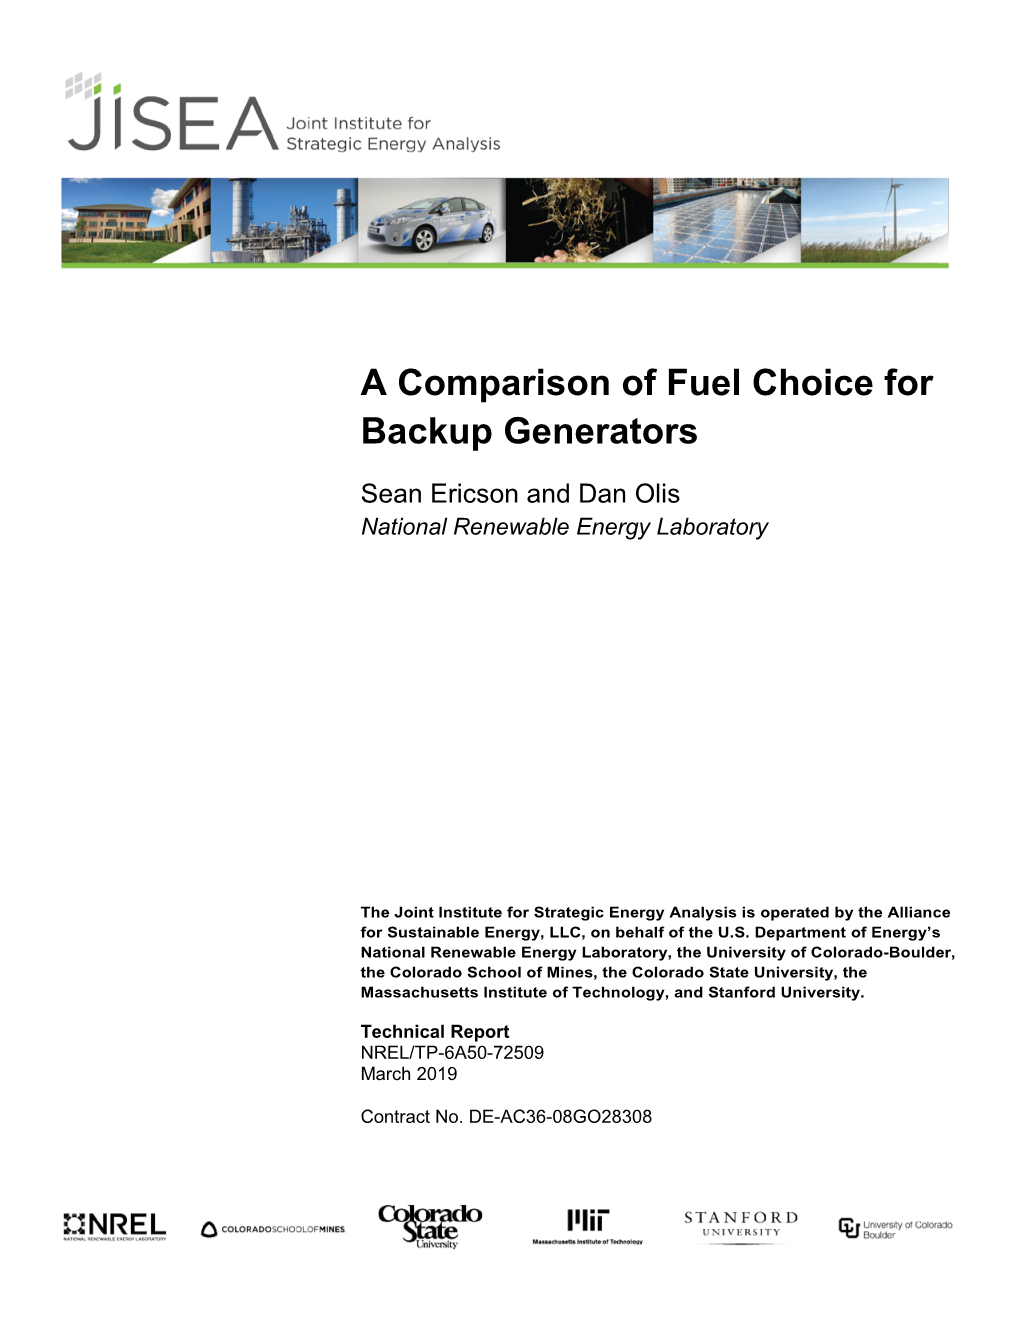 A Comparison of Fuel Choice for Backup Generators